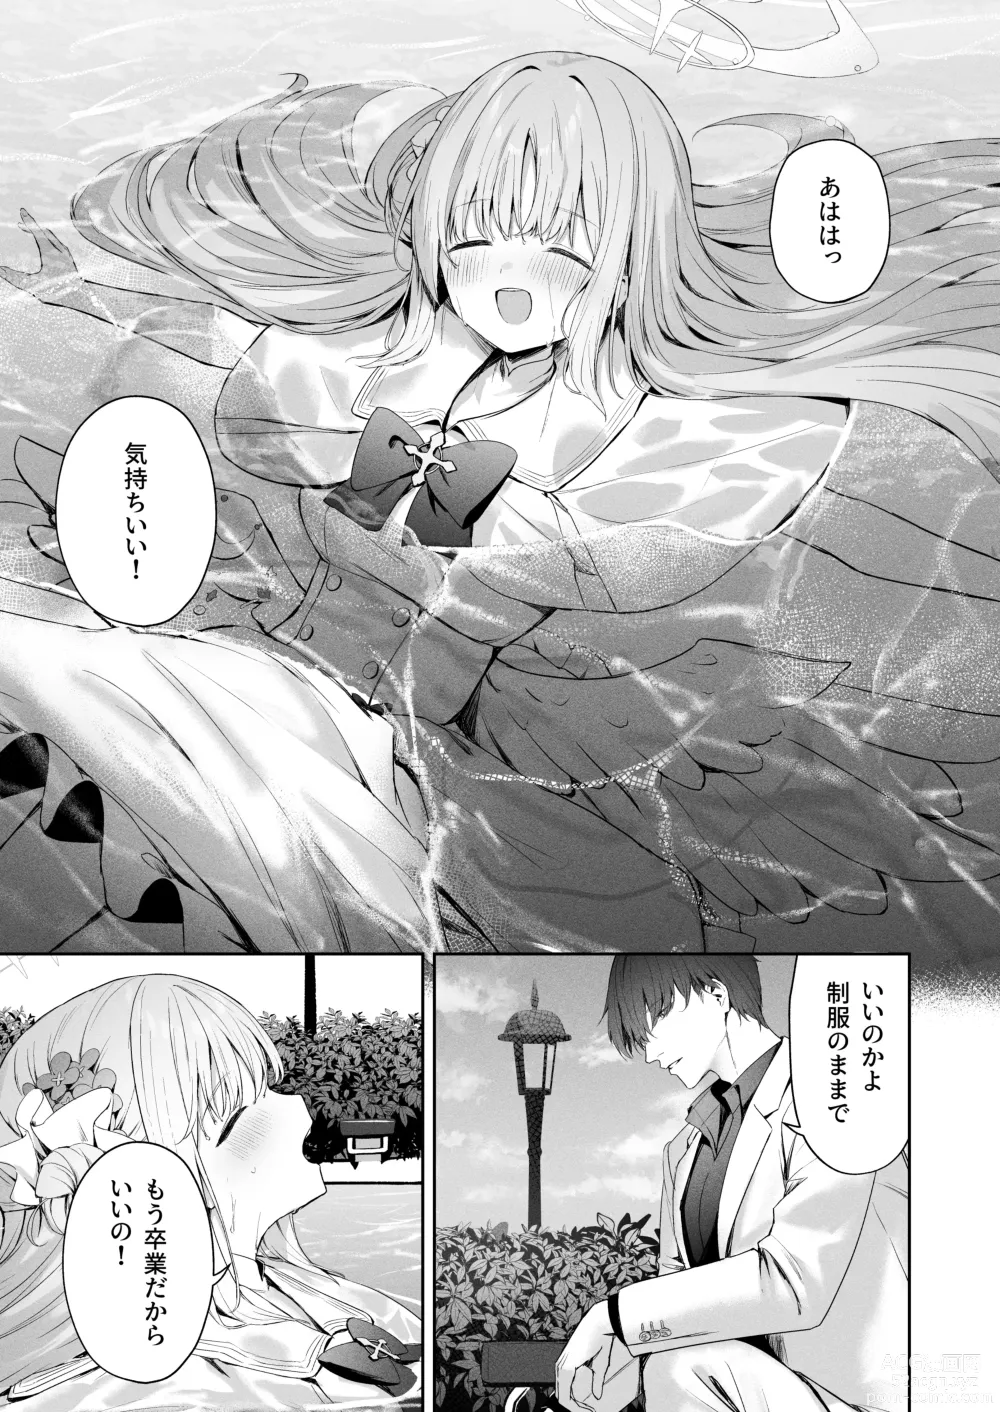 Page 4 of doujinshi Daydream kara Samete - THE END OF DAYDREAMING